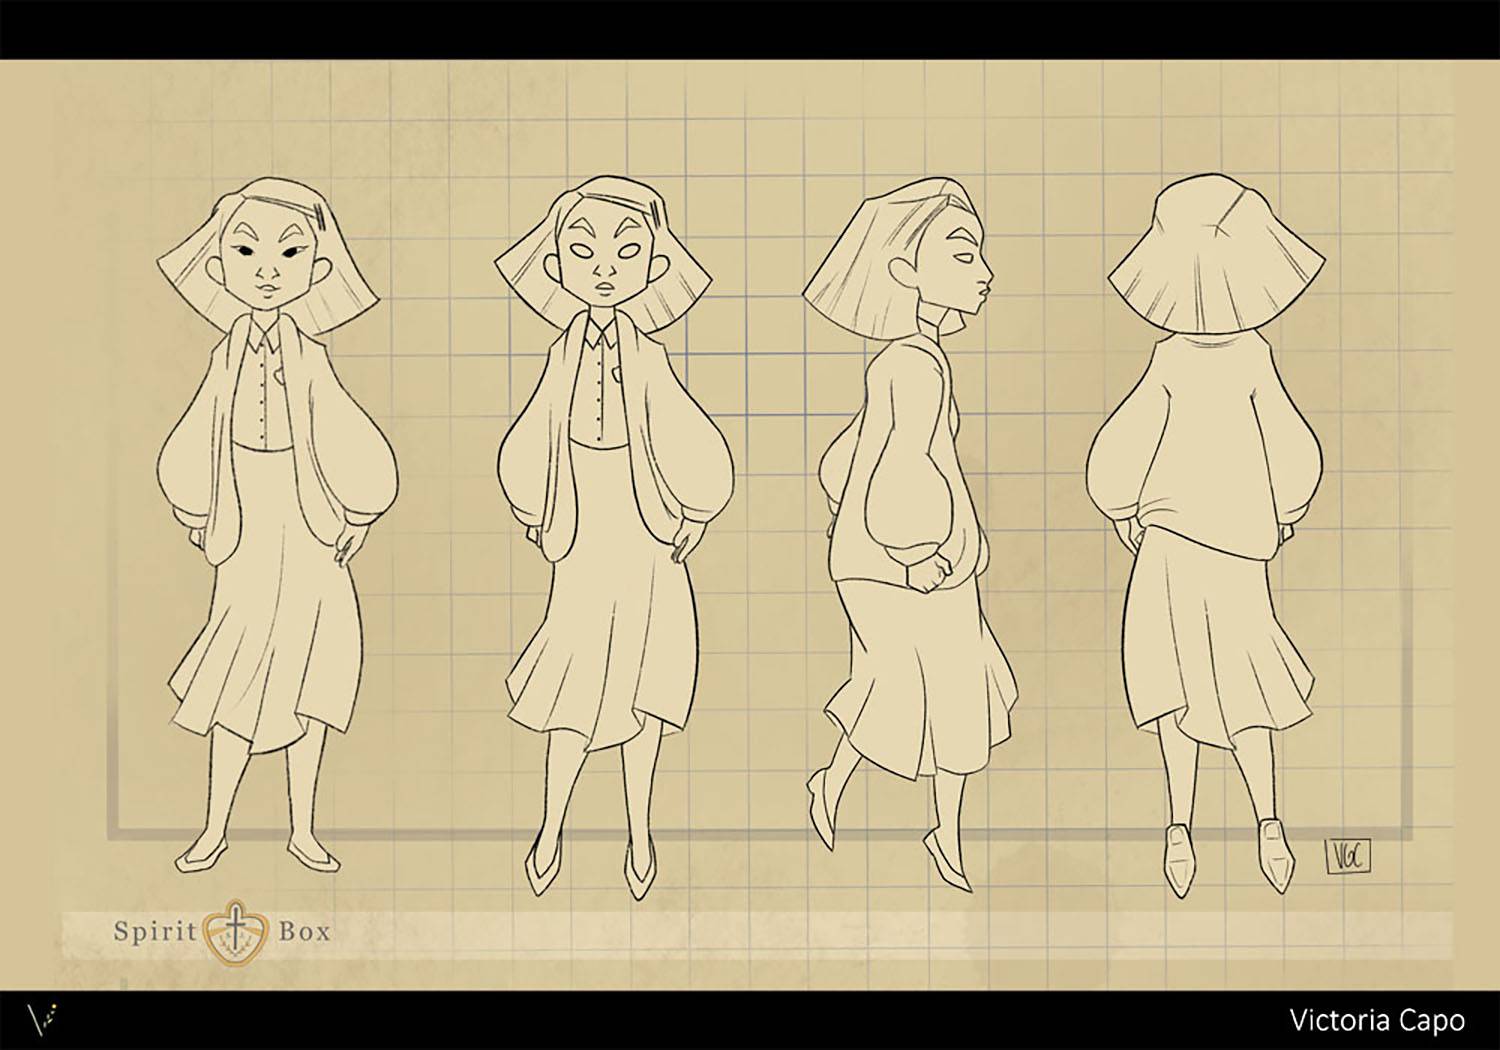 Character turn-around for Grace, a ghost character from my thesis project "Spirit Box".